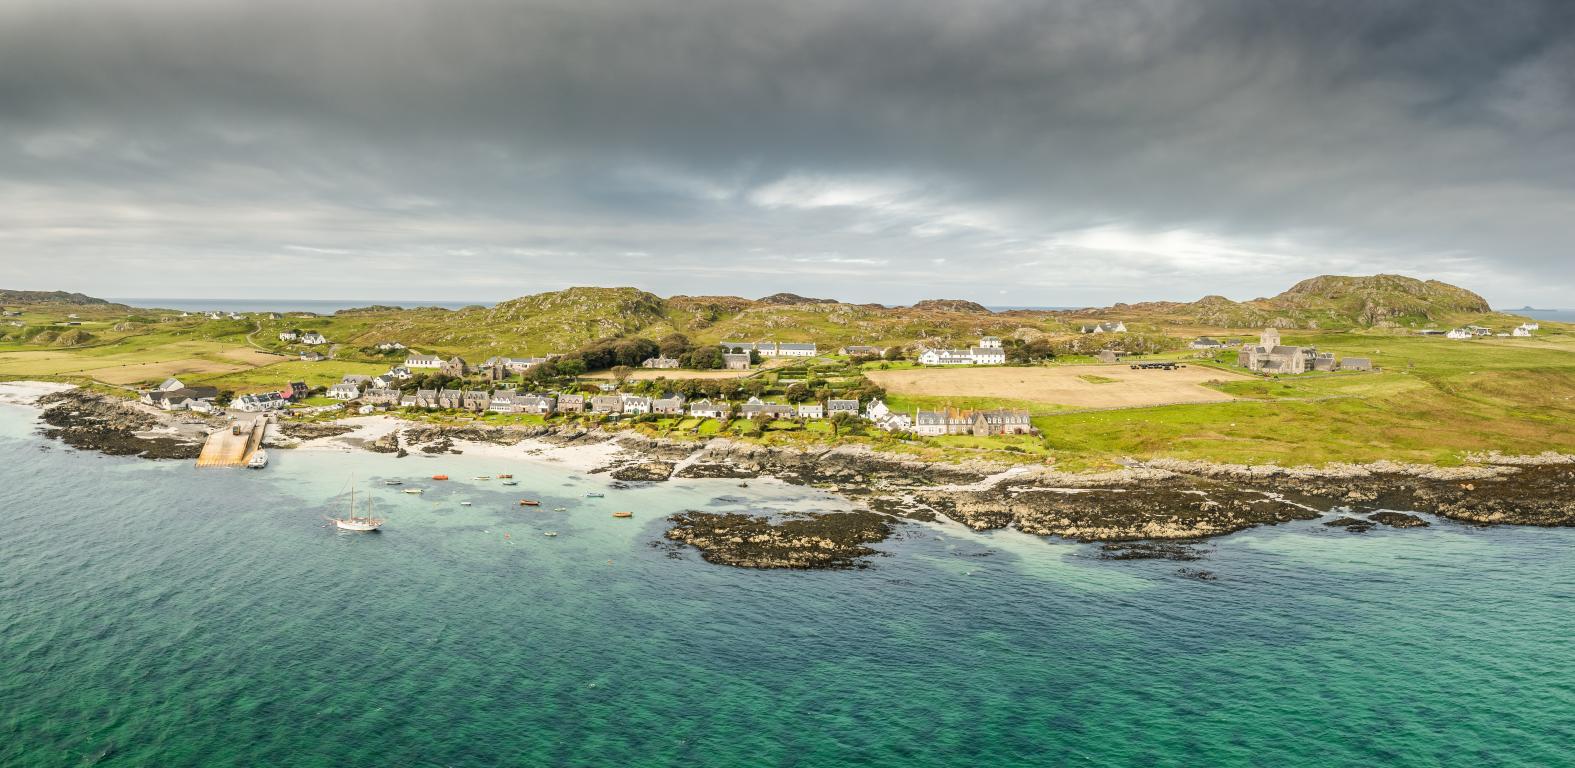 Iona Abbey approach from Mull. (Credit: Airborne Lens)